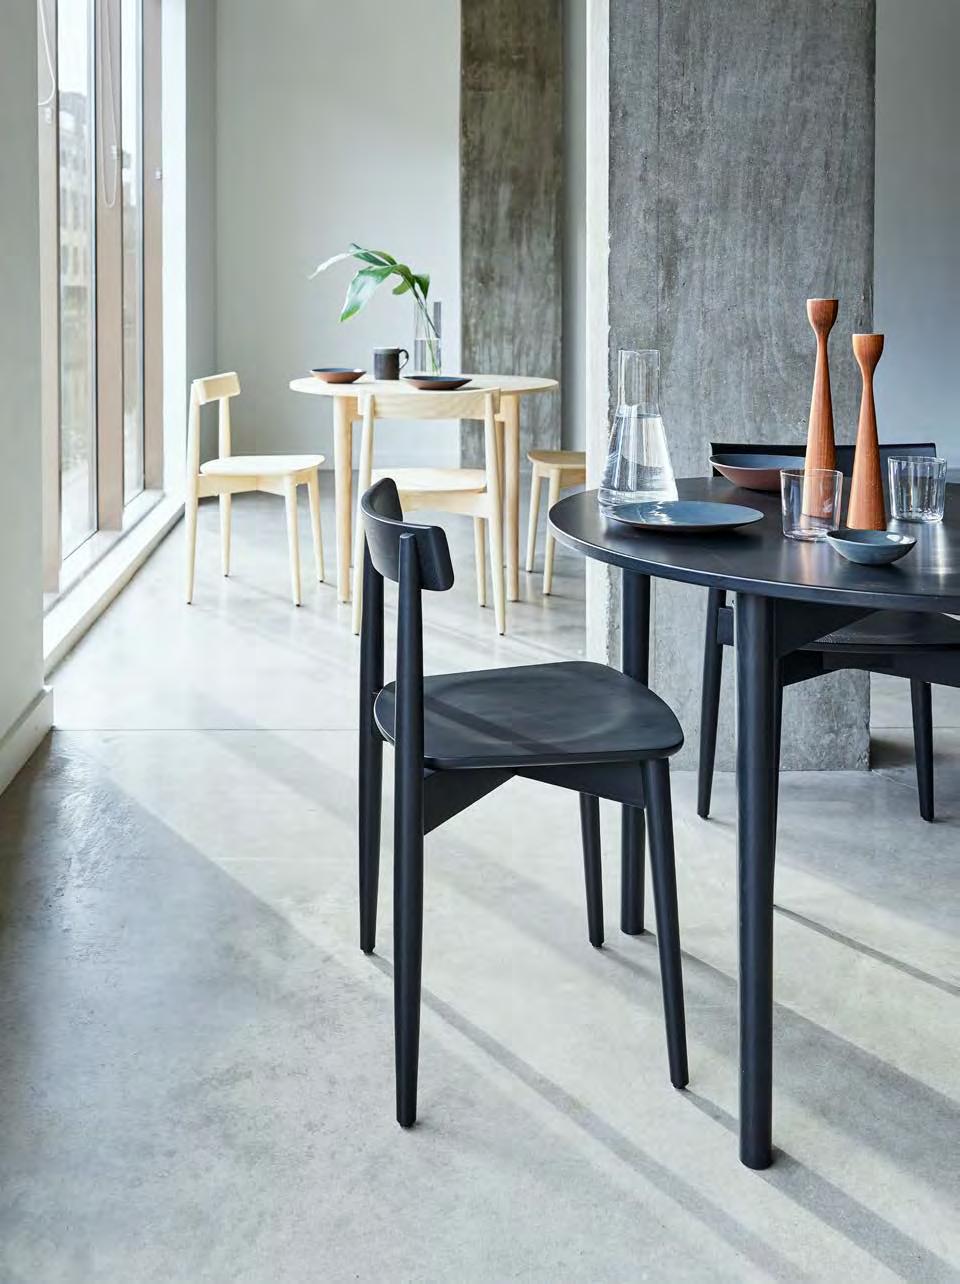 minimal collection made in and designed for cafes, restaurants, bars, but perfectly at home